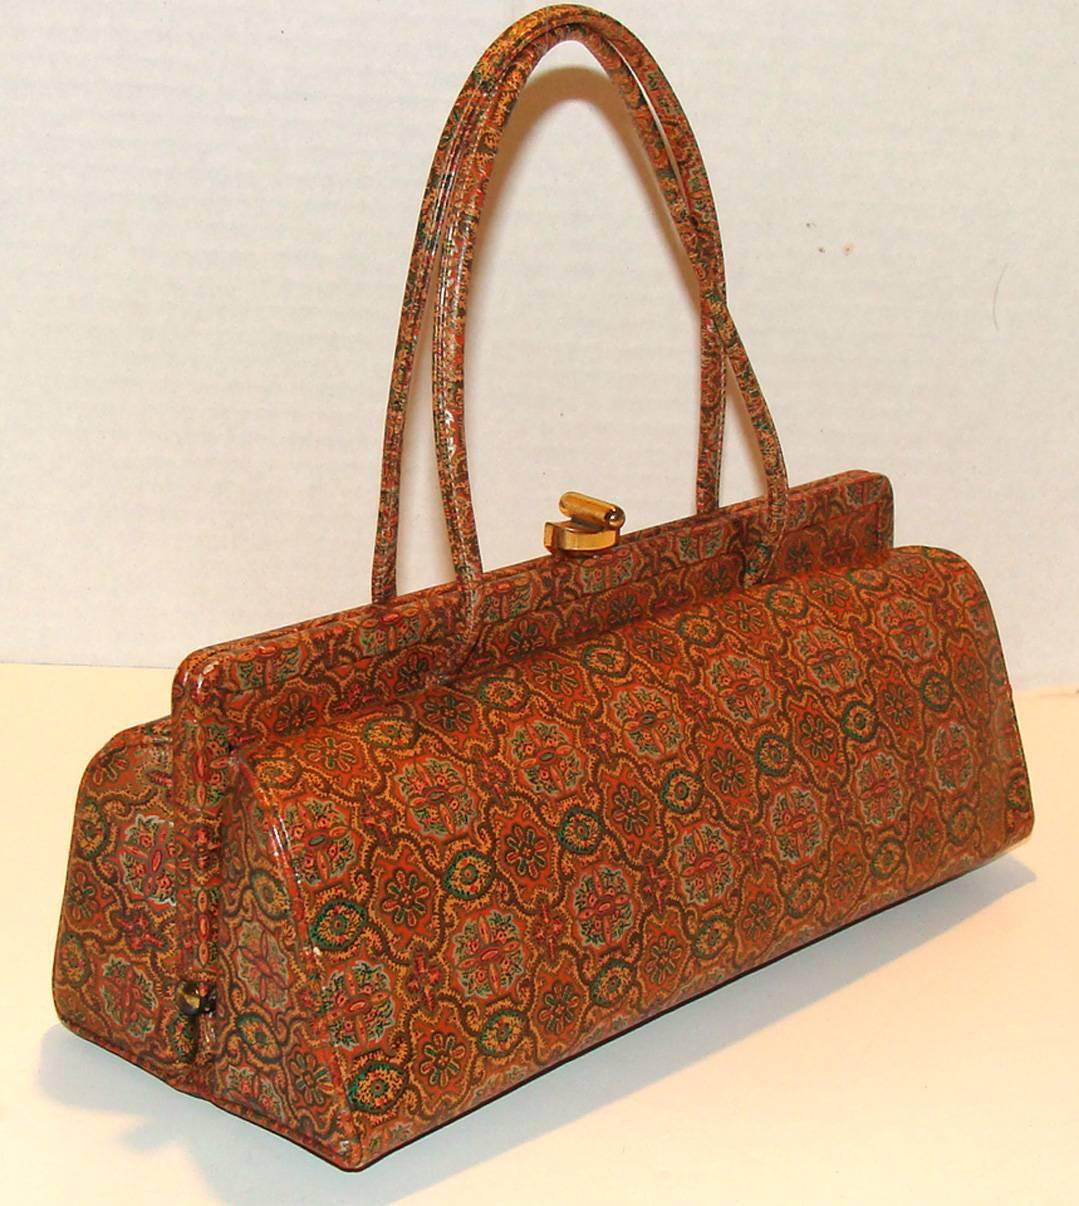 This bag is part of a large consignment from one of our long-time collectors who is downsizing.  For years she was one of the most successful women in the United States.  She ignored the glass ceiling and was never held back, she continued to push